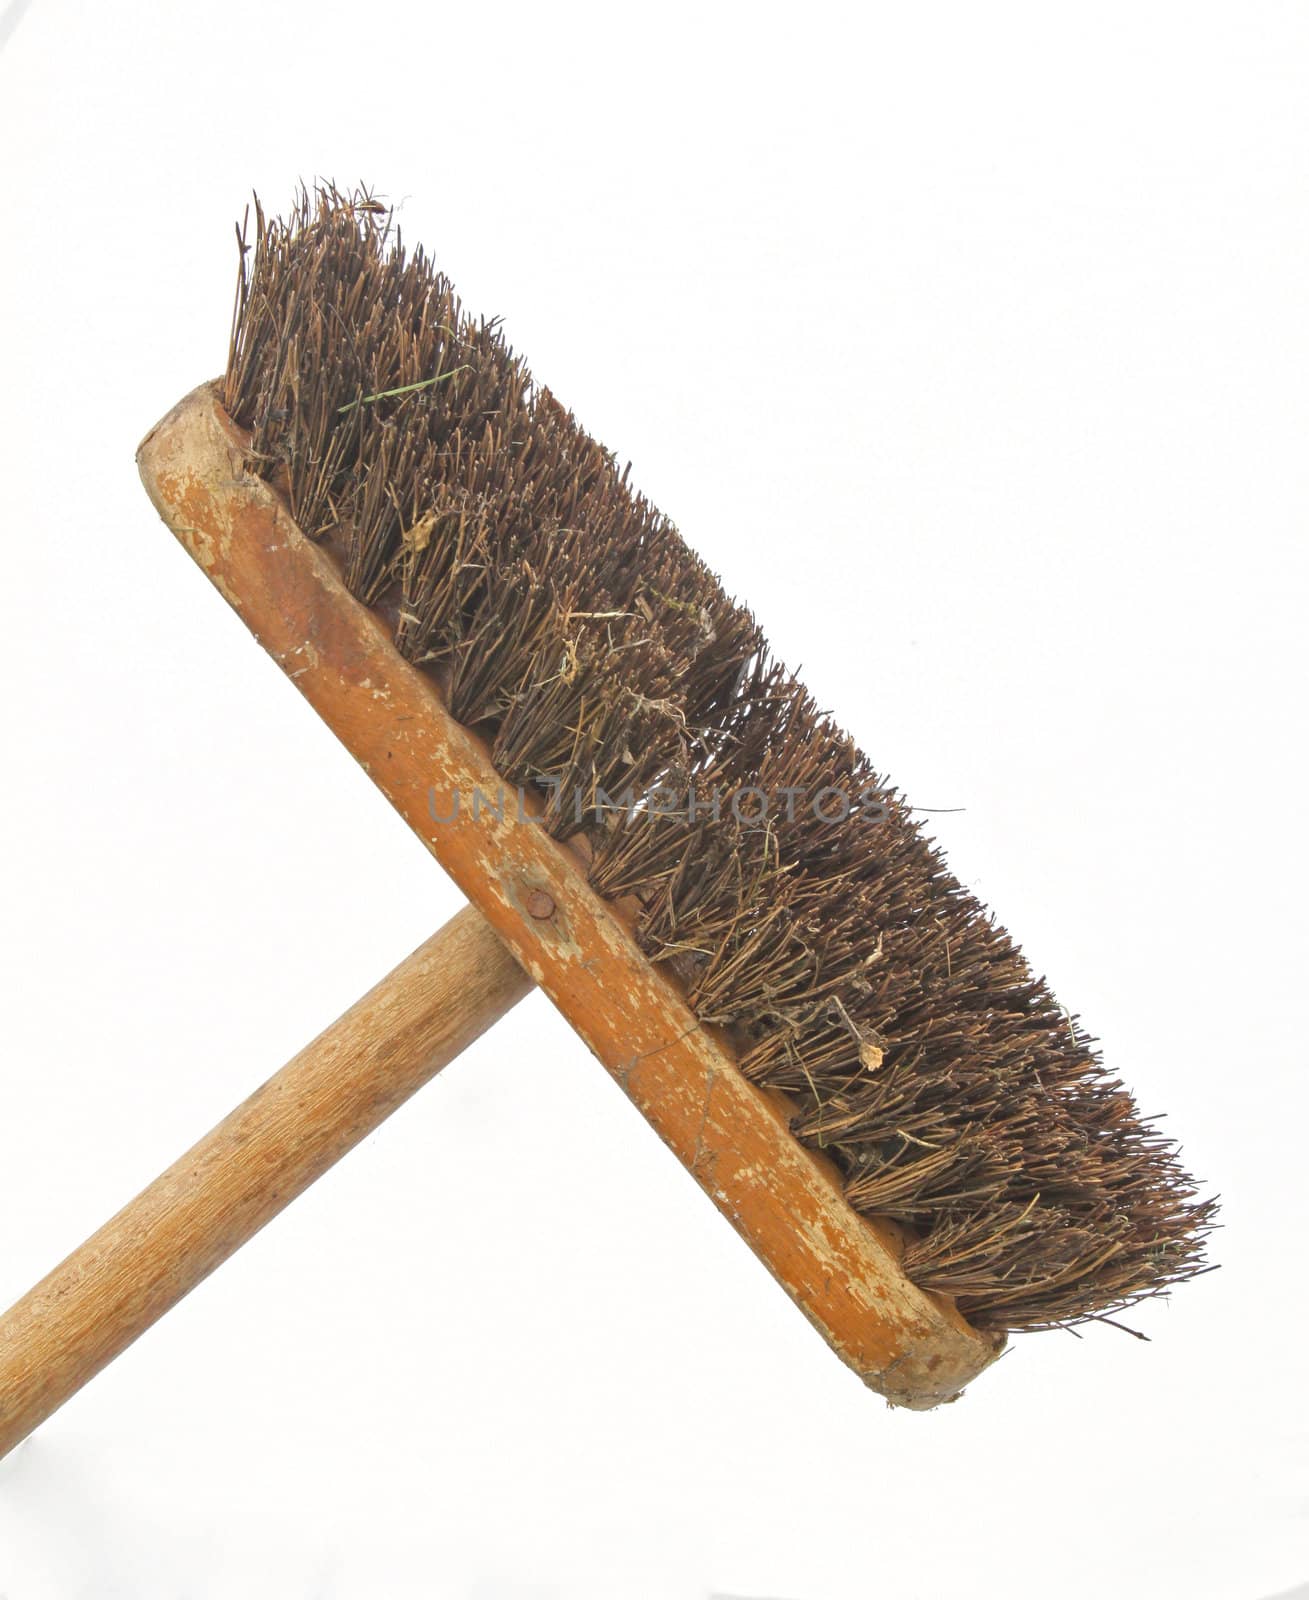 Sweeping brush on a white background.